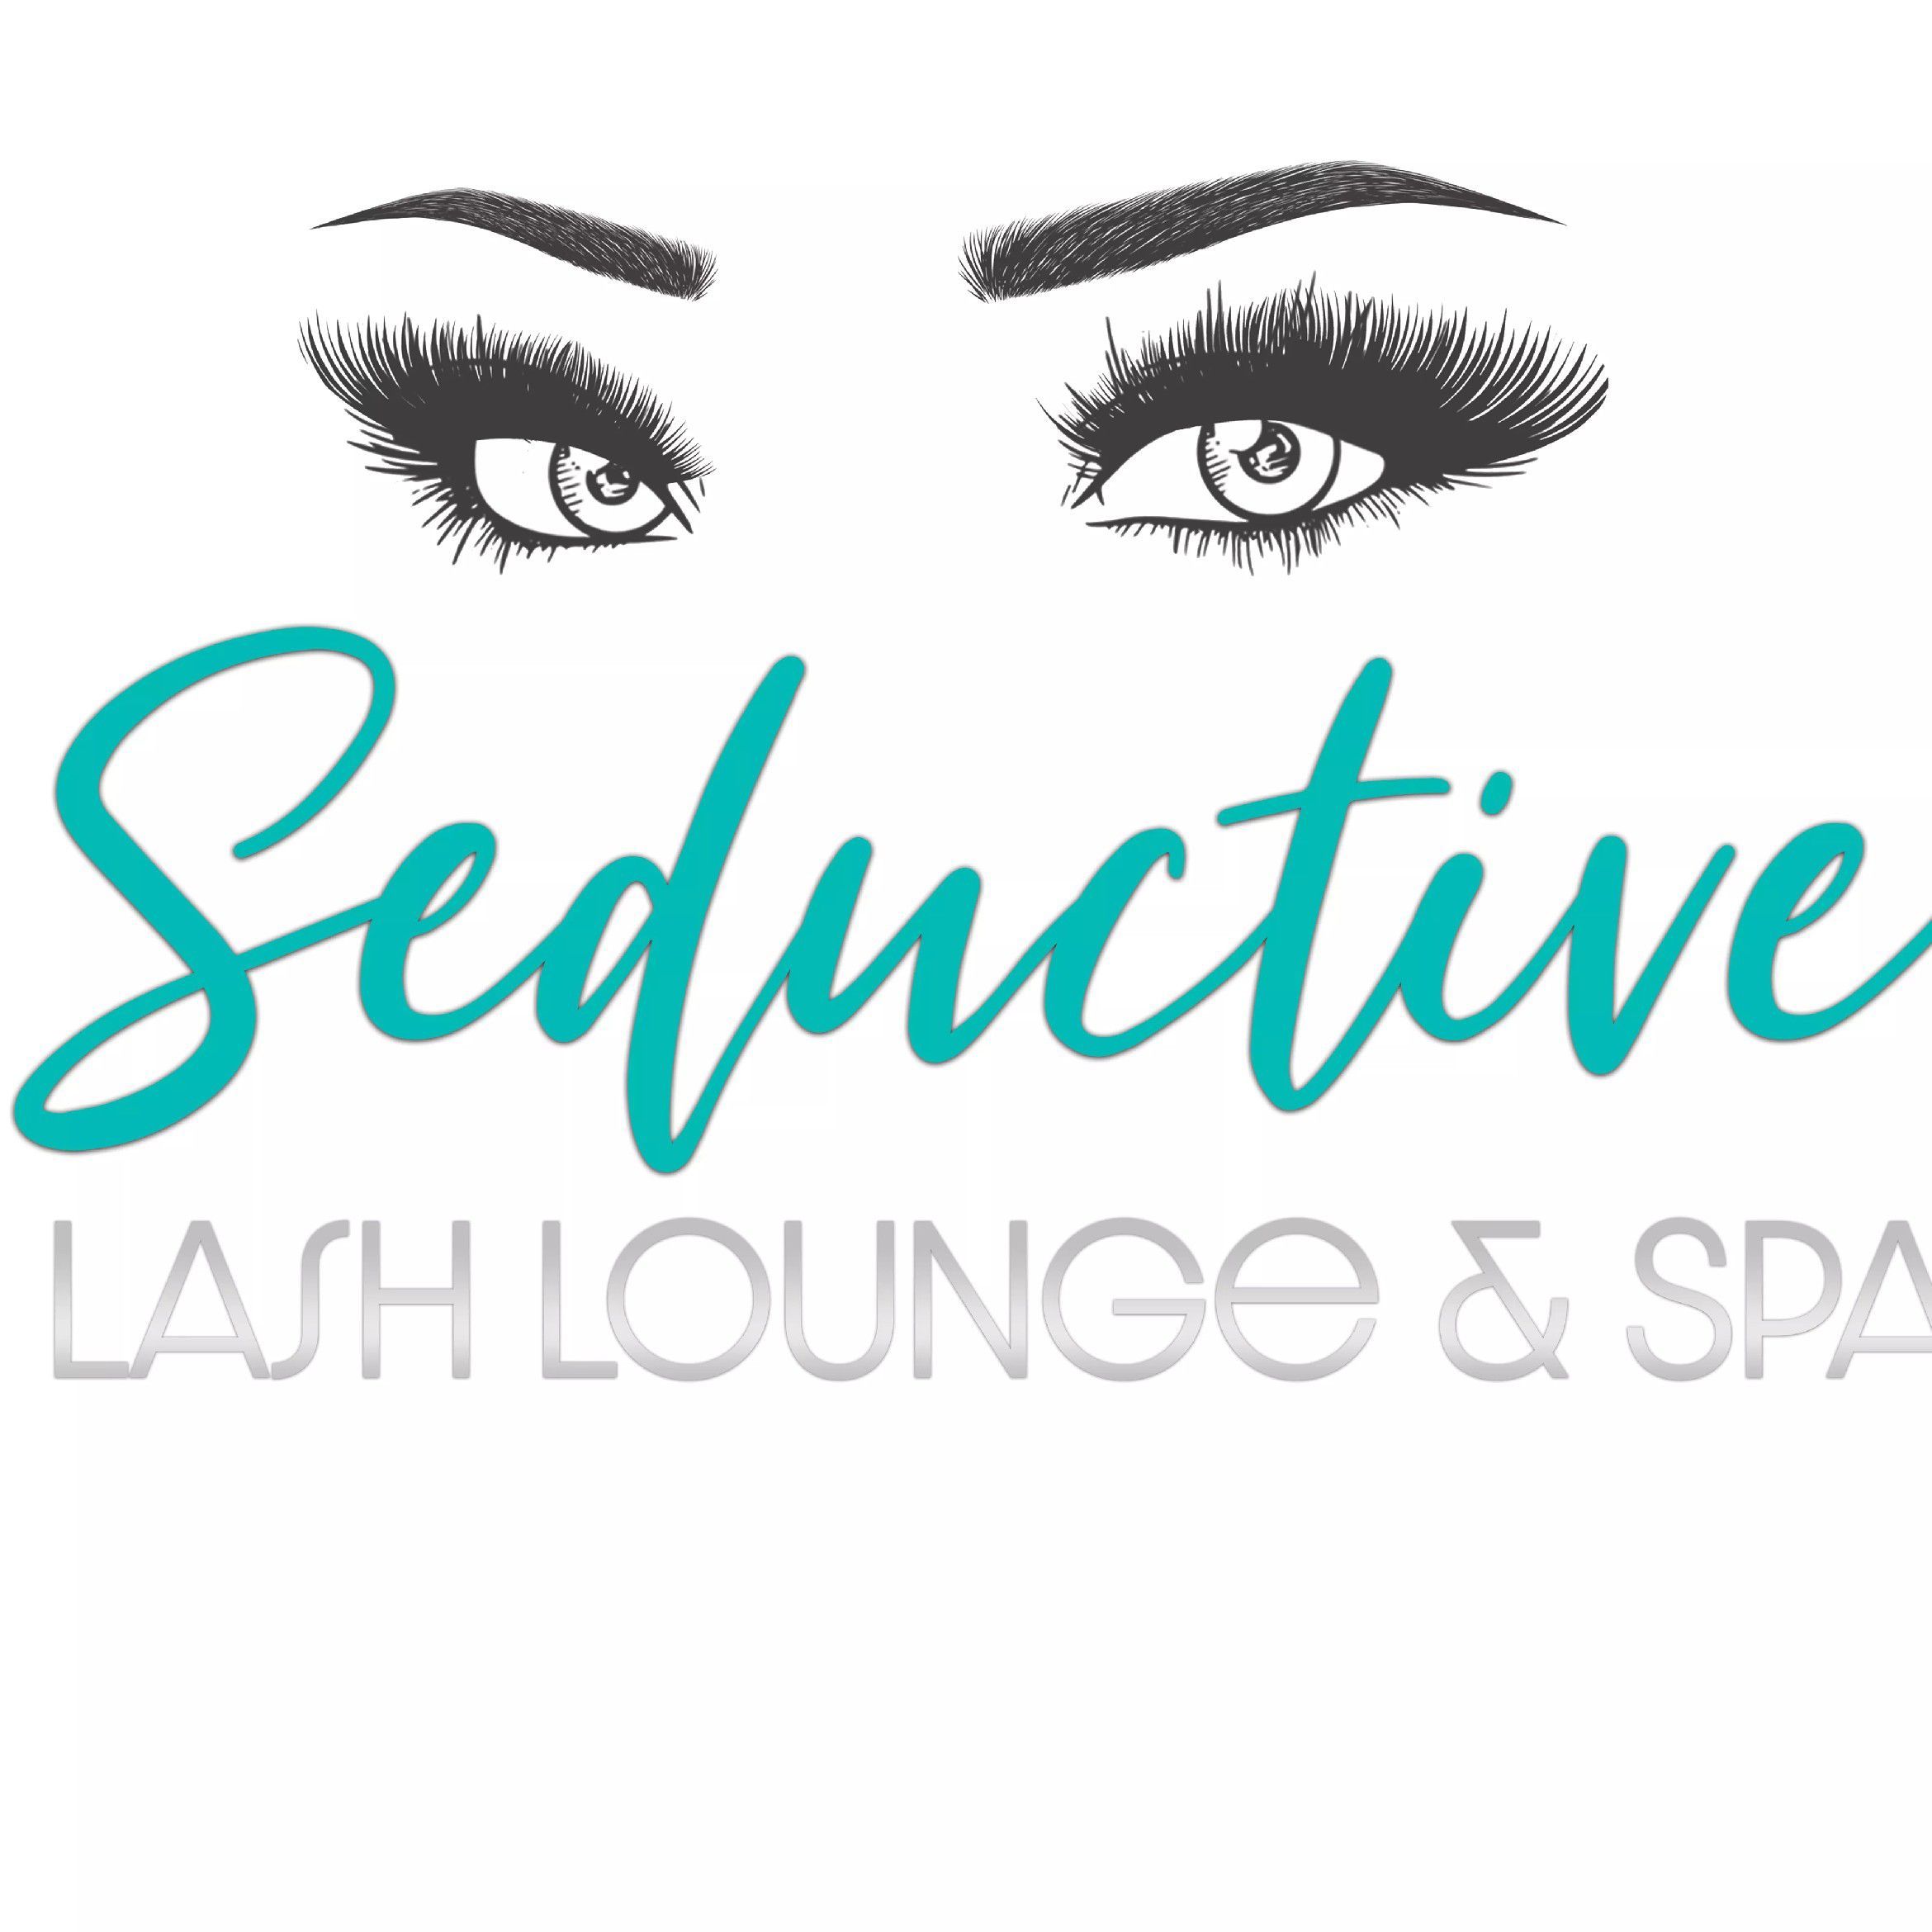 Lash room by Carina - Greenford - Book Online - Prices, Reviews